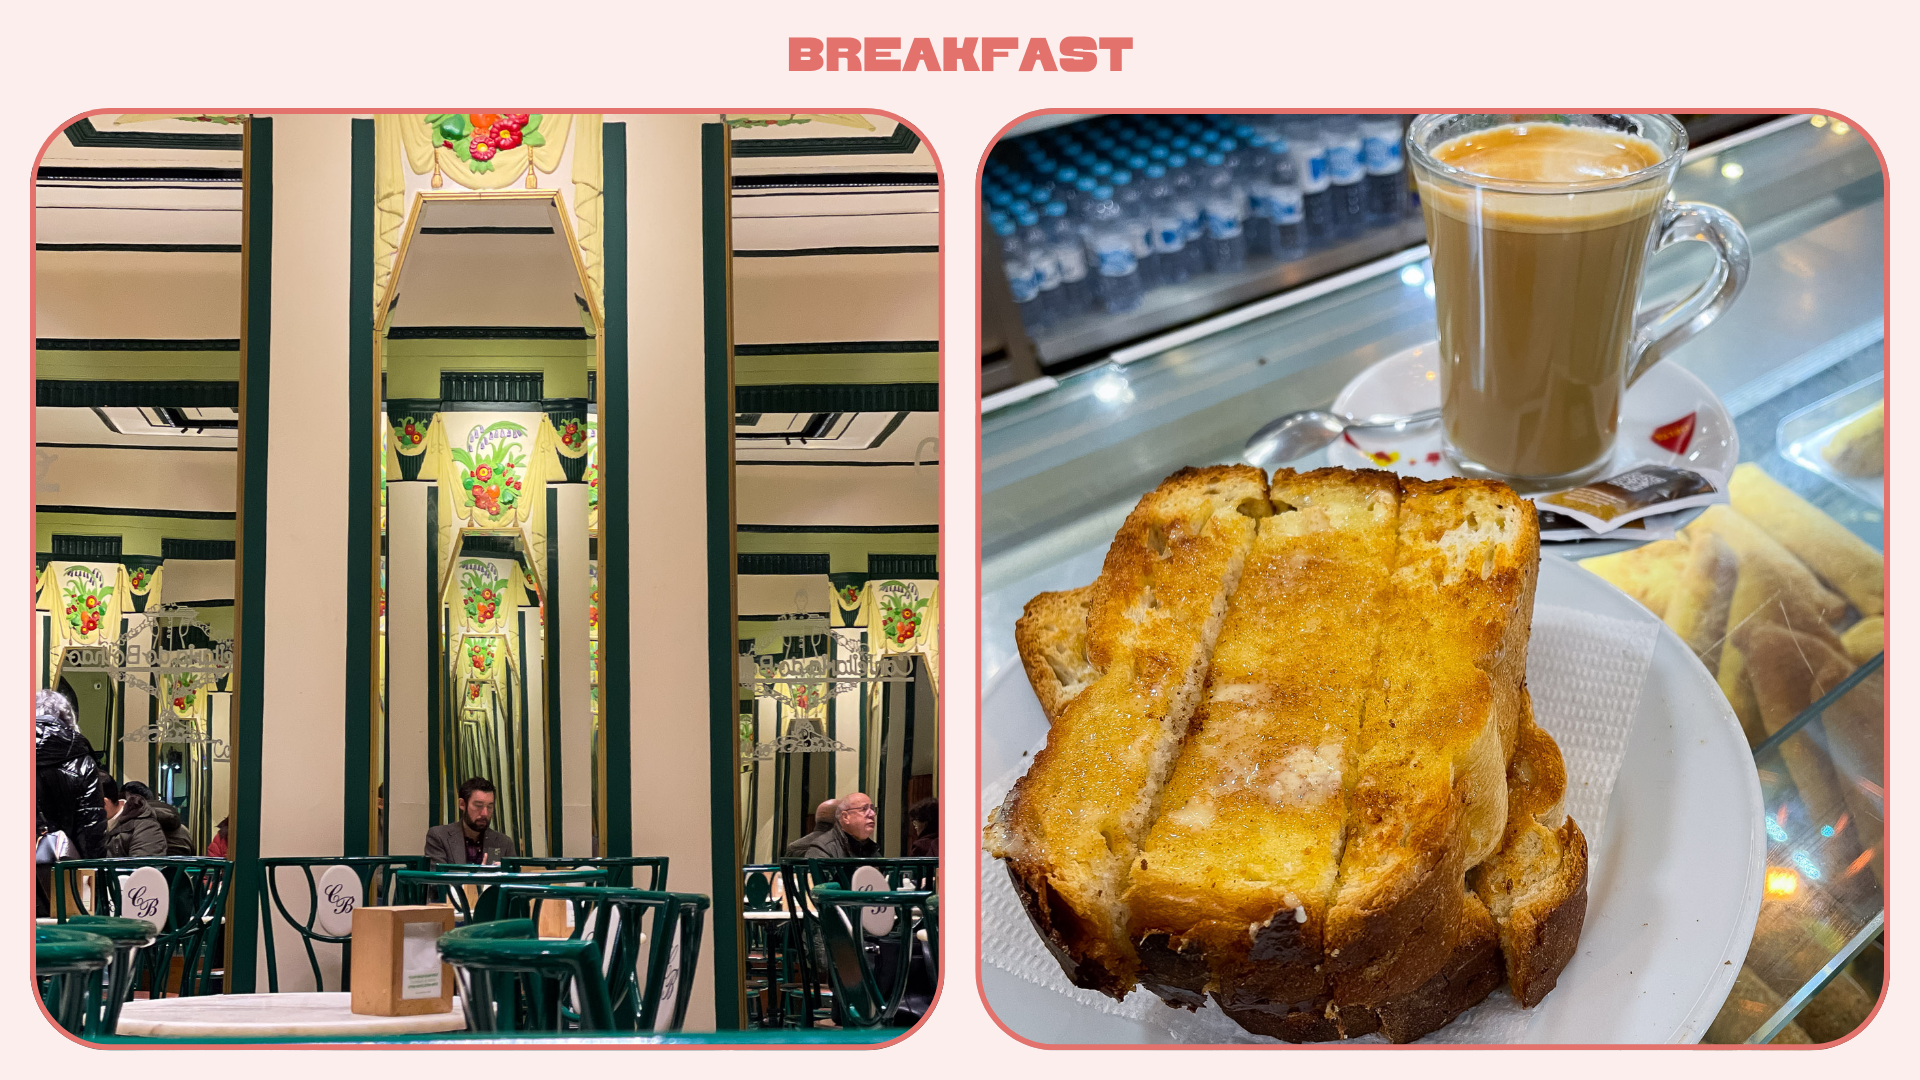 L: Art Deco interior of a Porto cafe. R: Portuguese-style French toast with butter